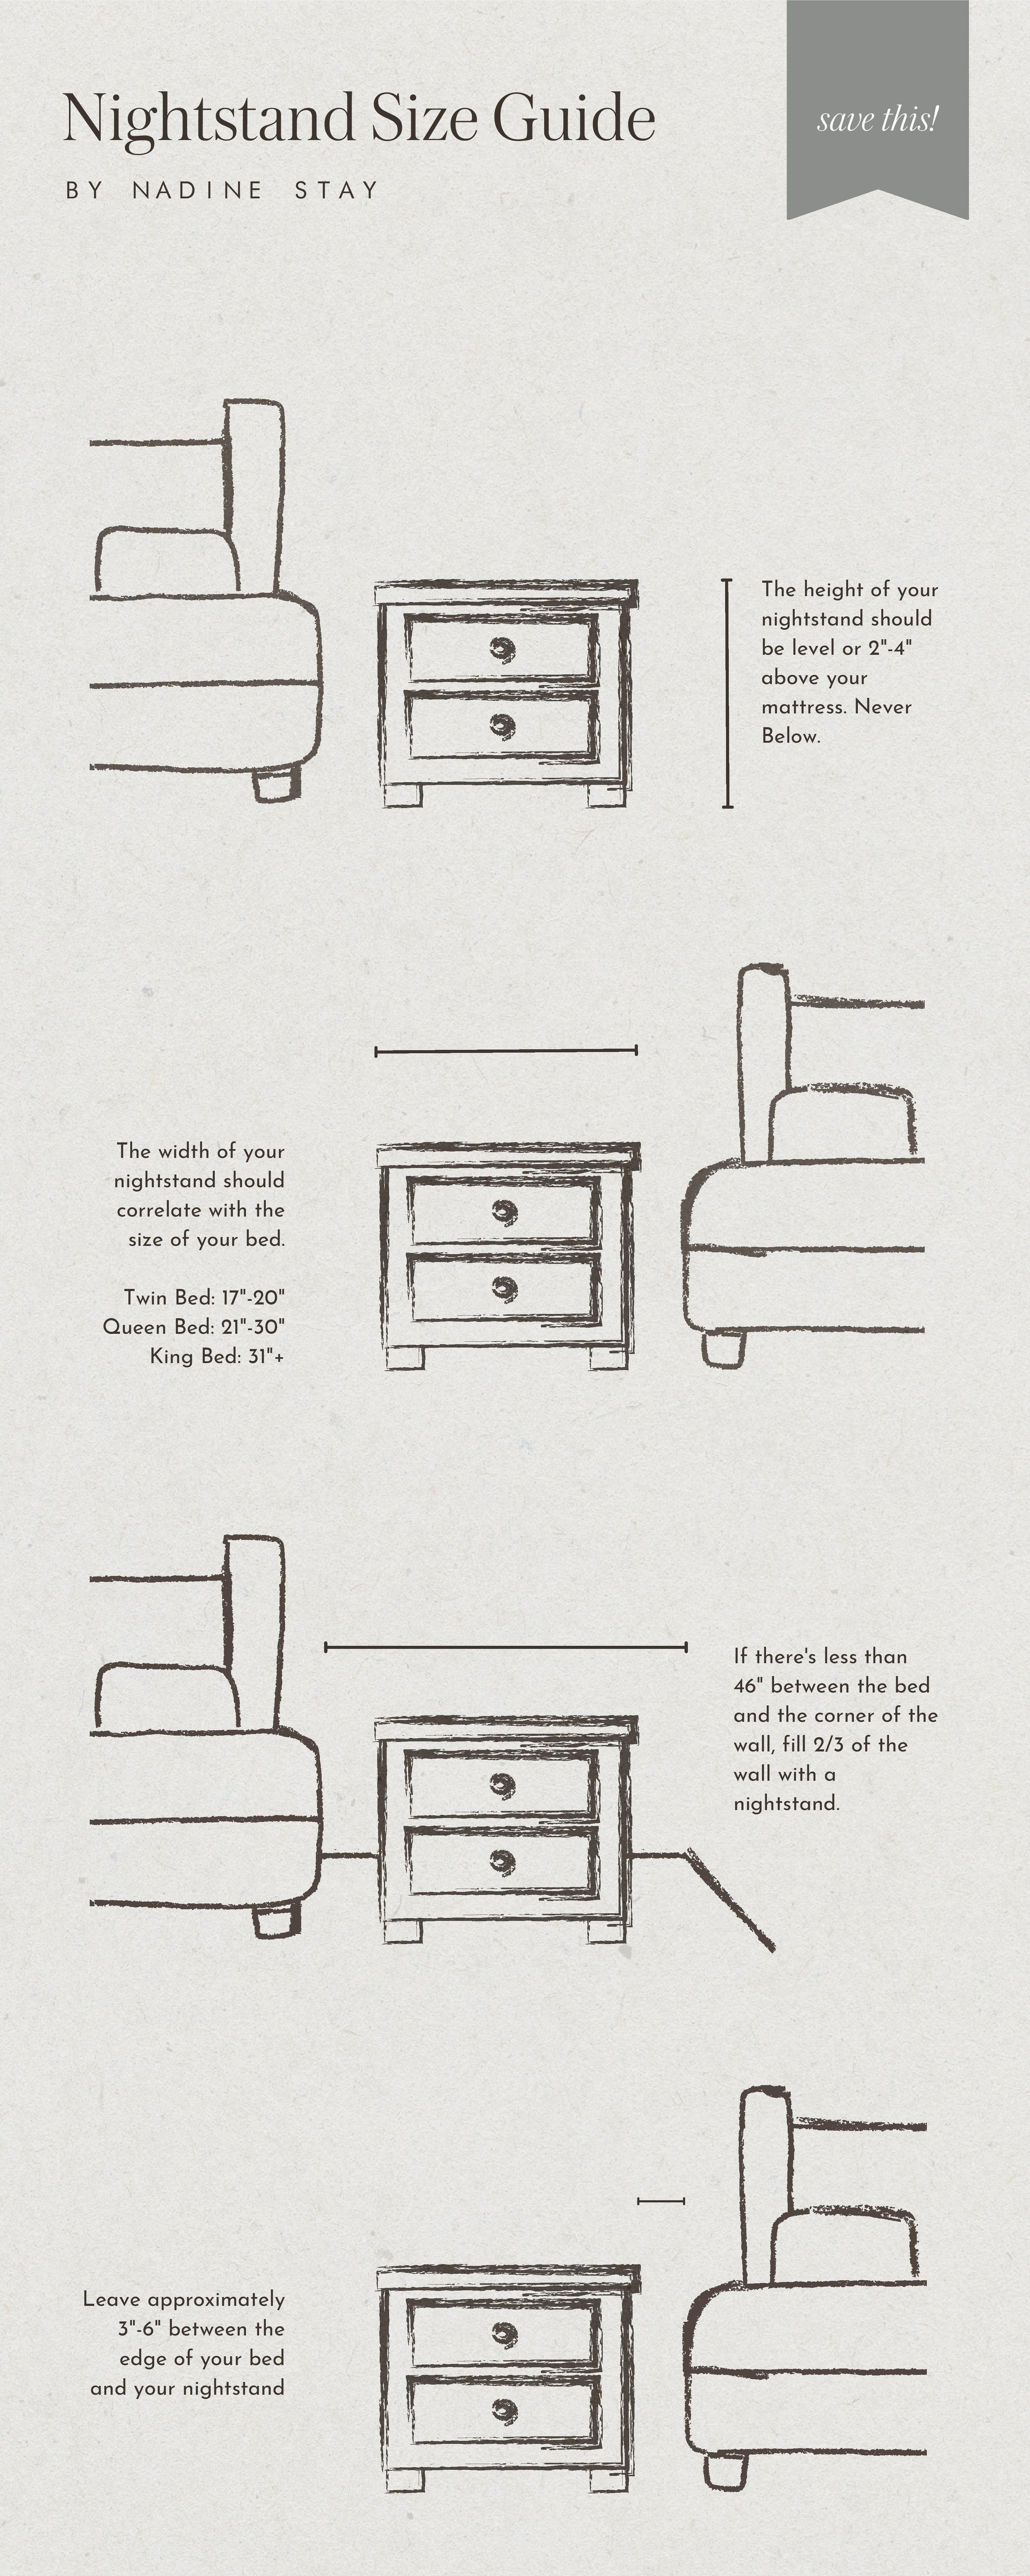 Nightstand Size & Placement Guide by Nadine Stay | What size nightstand you should get for a twin, queen, or king size bed. Nightstand width guide. How to pick the right size nightstand. 12 nightstands I love under $500.